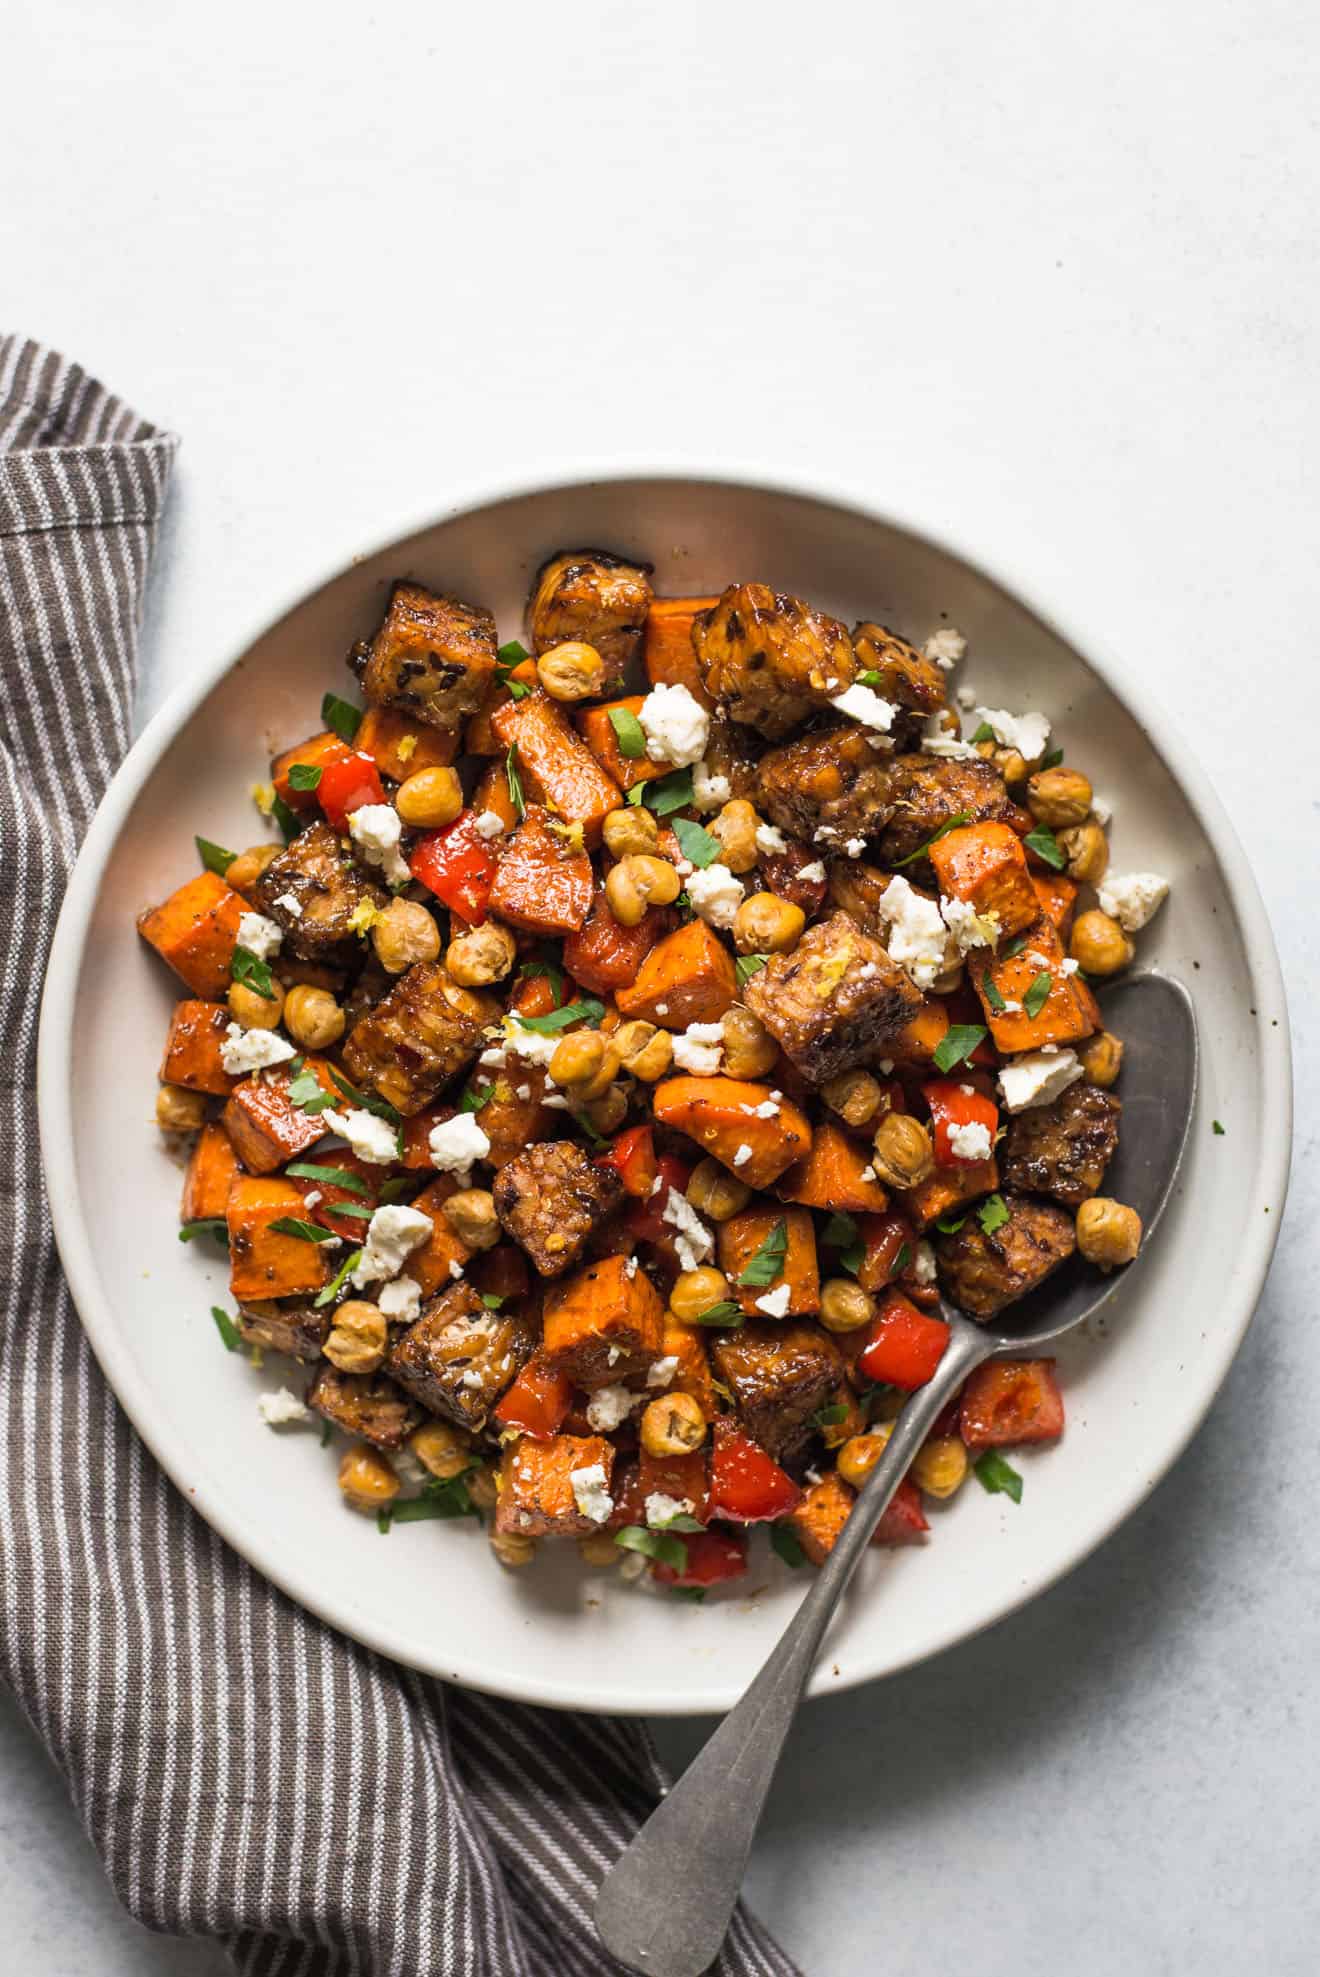 Baked Tempeh with Tamarind Glaze, Sweet Potatoes and Roasted Chickpeas - an easy, healthy sheet pan dinner that's great for weeknights!